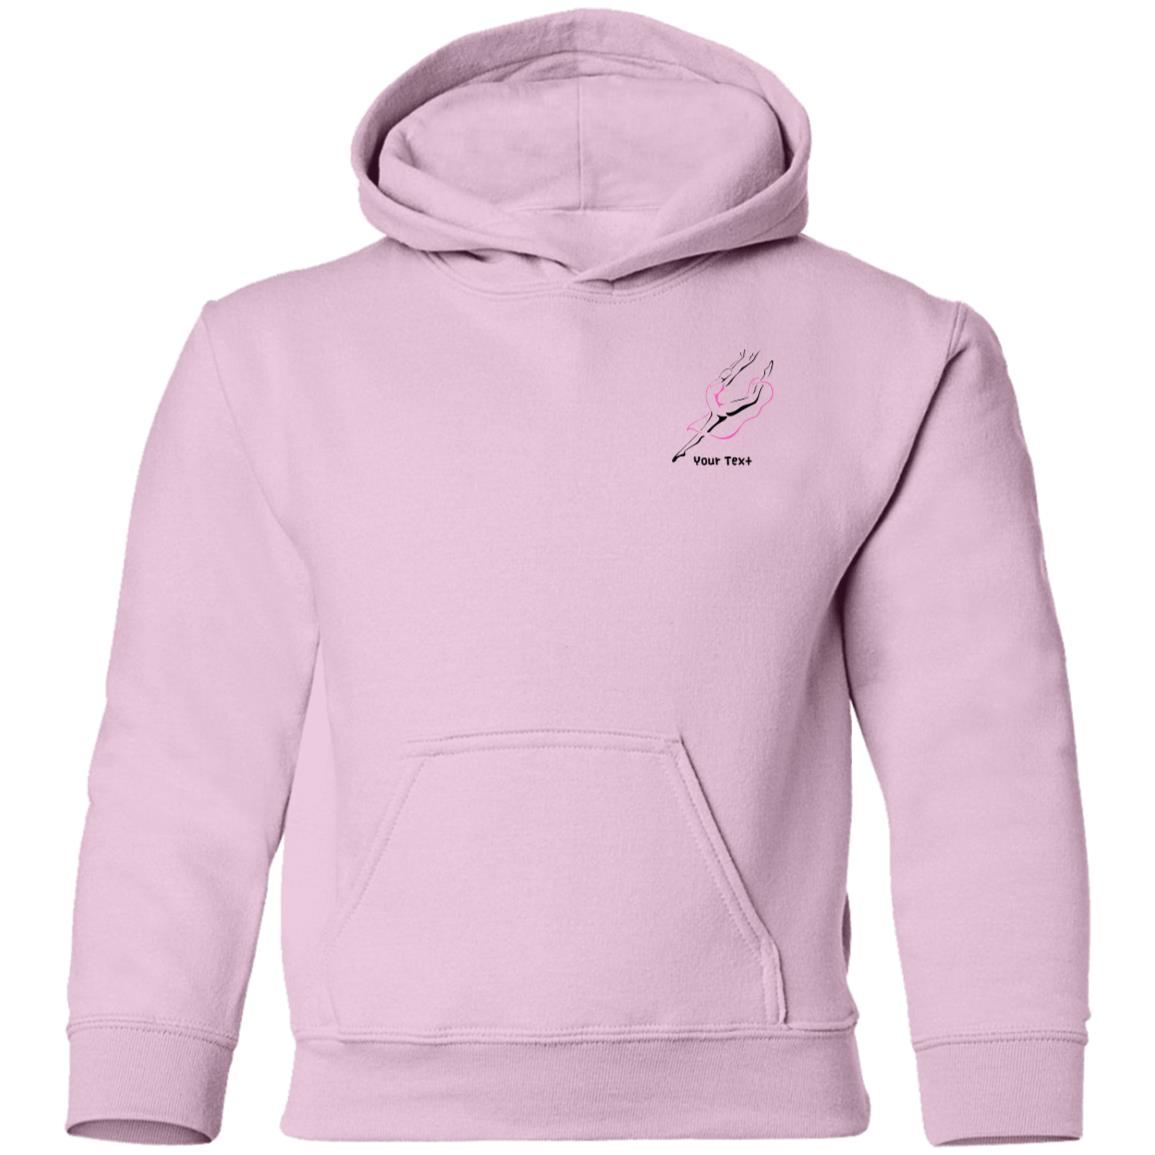 S2S personalized Youth Pullover Hoodie